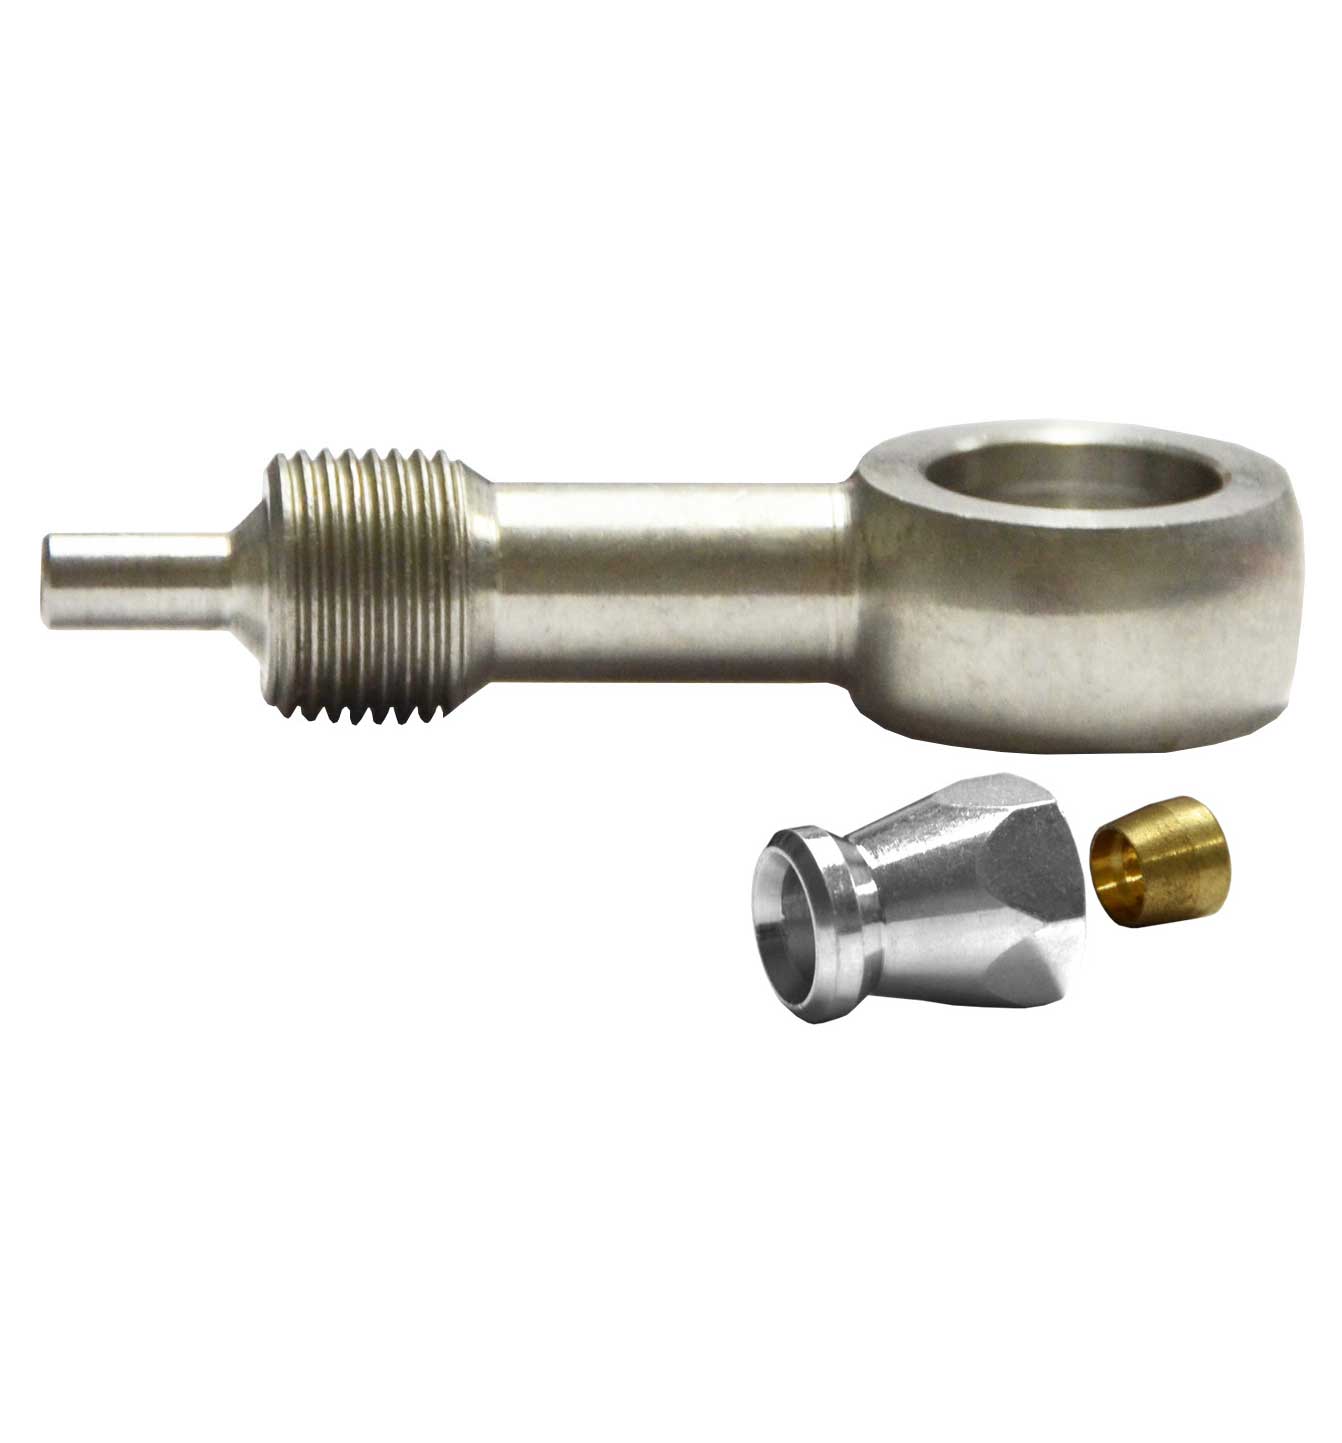 3/8" Banjo Fitting for AN-3 (3mm) - Stainless Steel